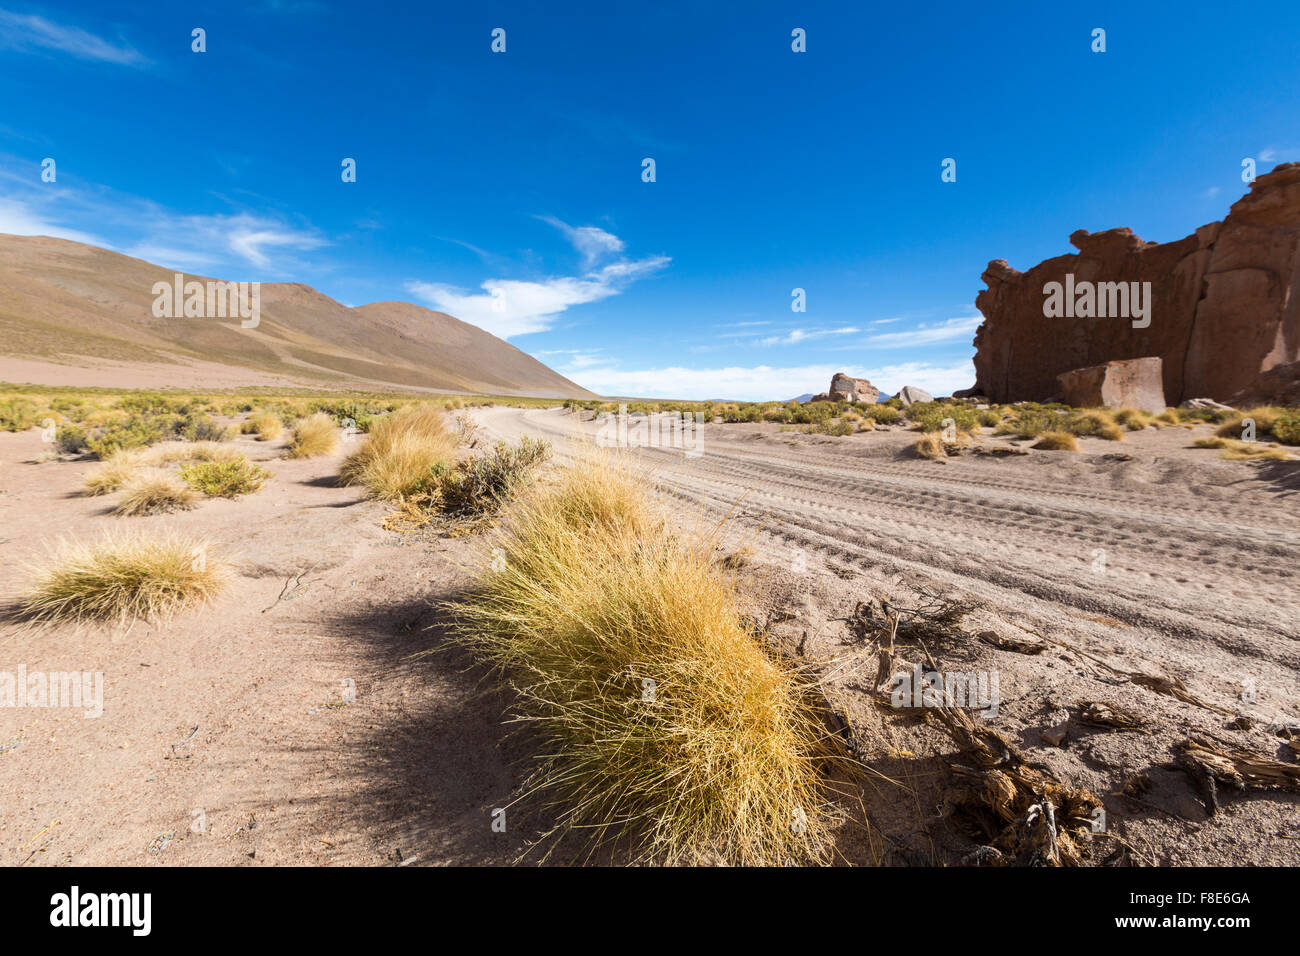 Sandy road track, grass and arid landscape against a clear blue sky. Bolivia Stock Photo